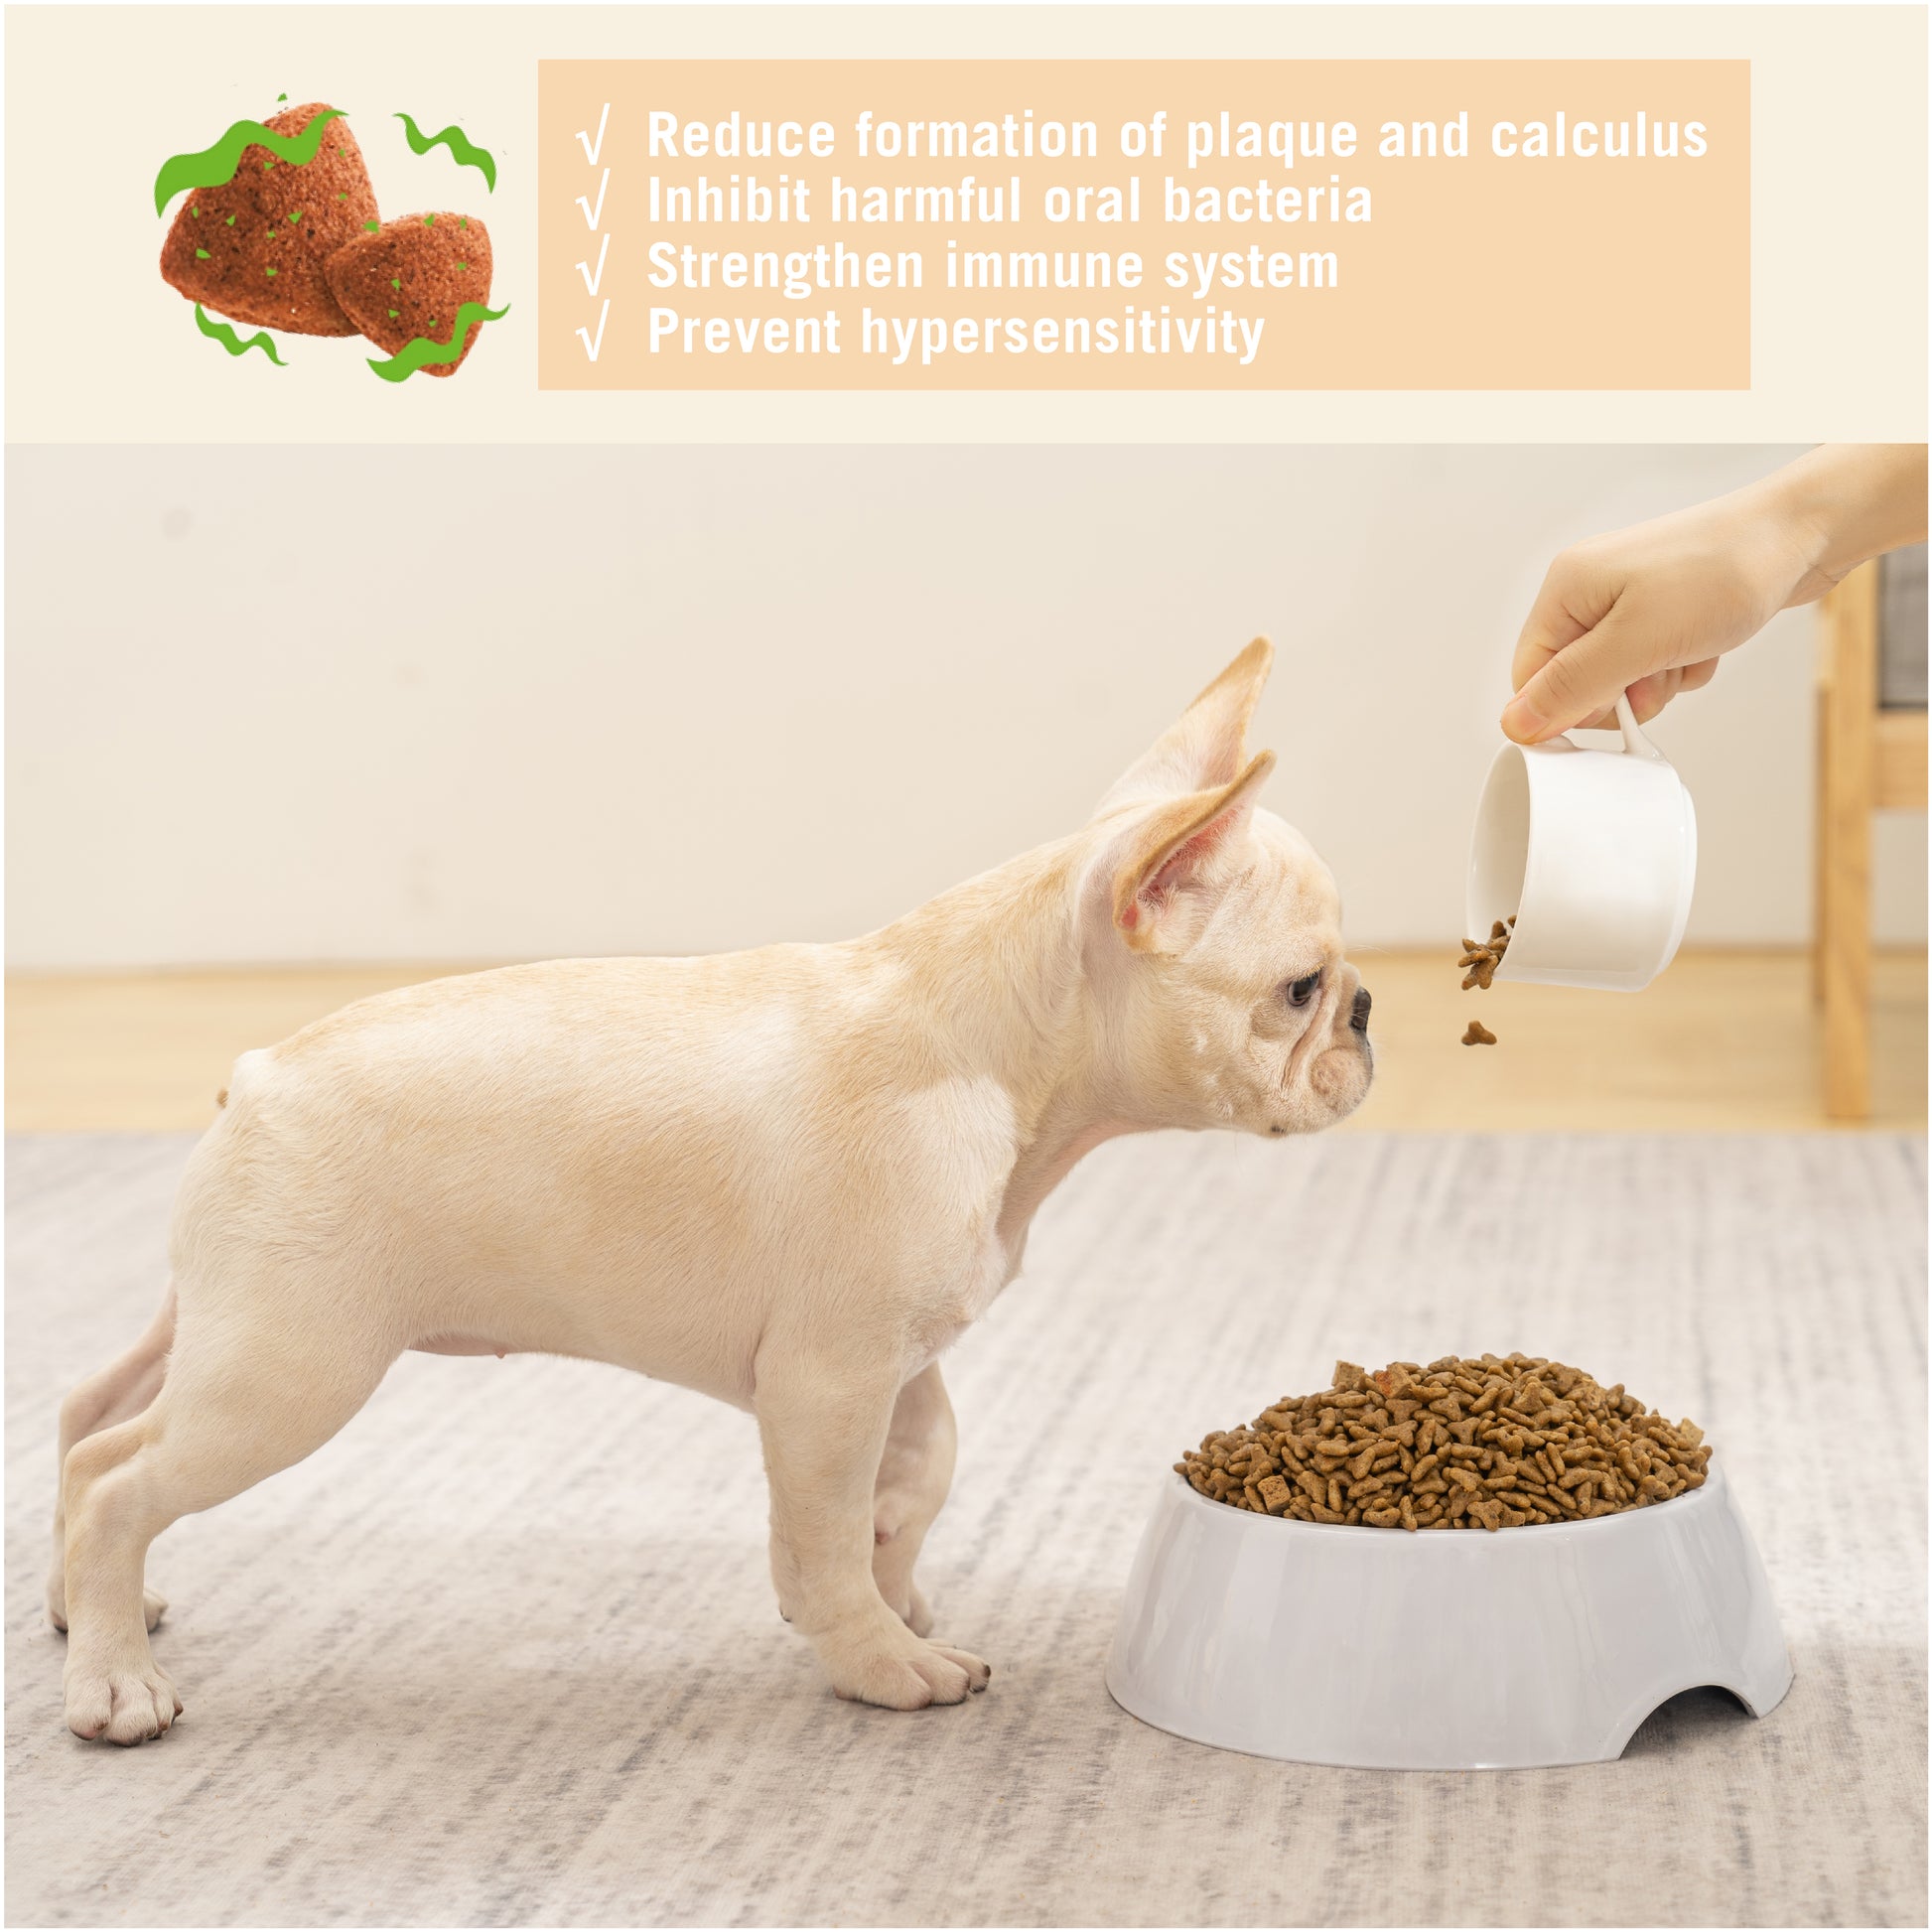 NatureBridge-Beauty Dog - Complete Food - All Life Stages- With Seaweed